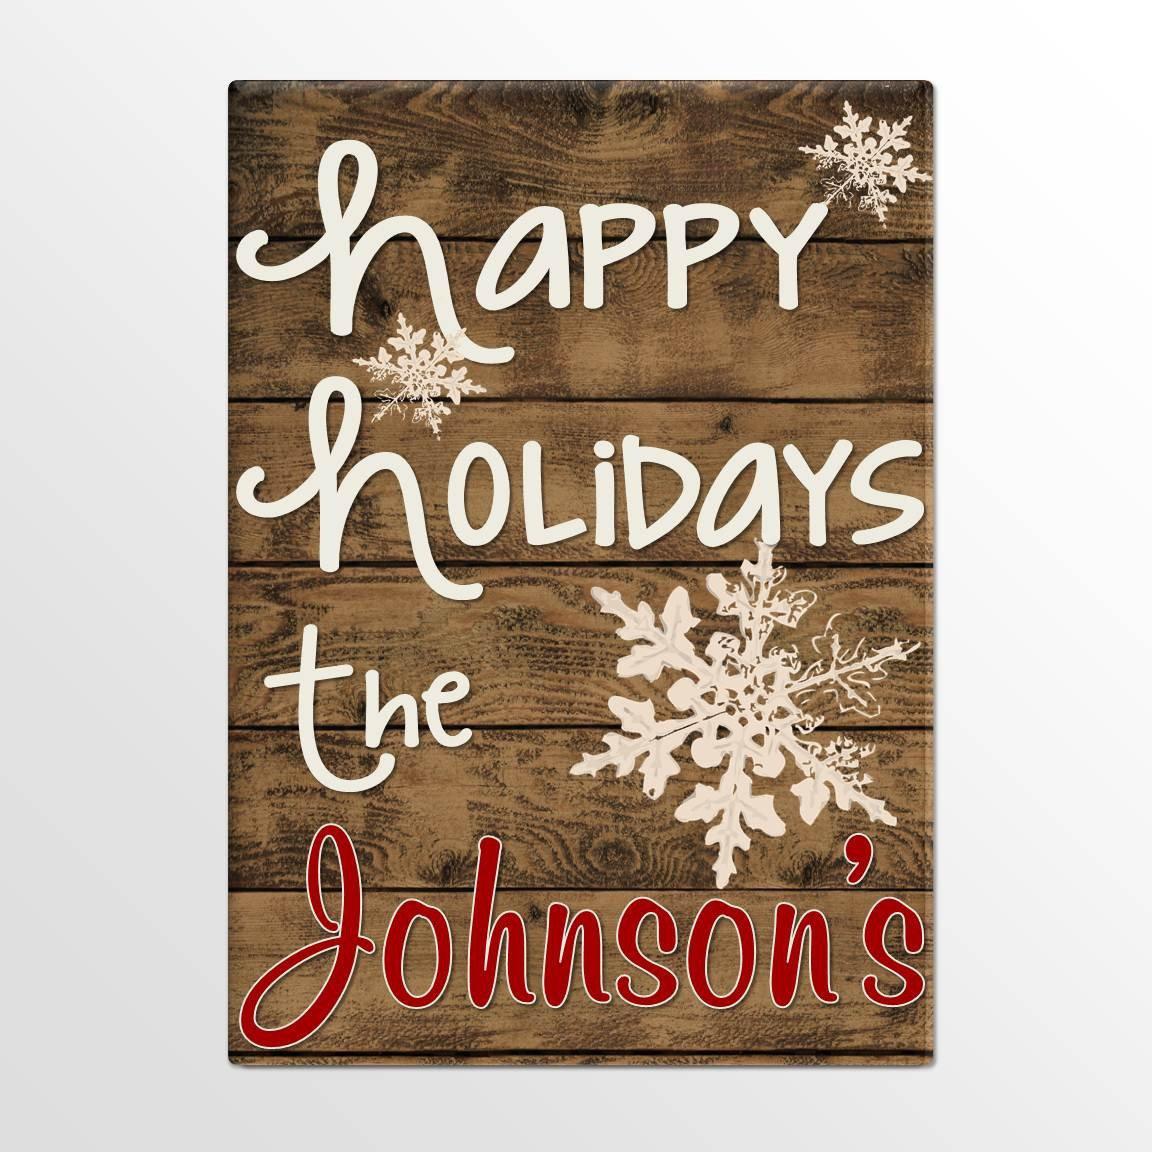 Personalized Holiday Canvas Signs - Happy Holidays Canvas